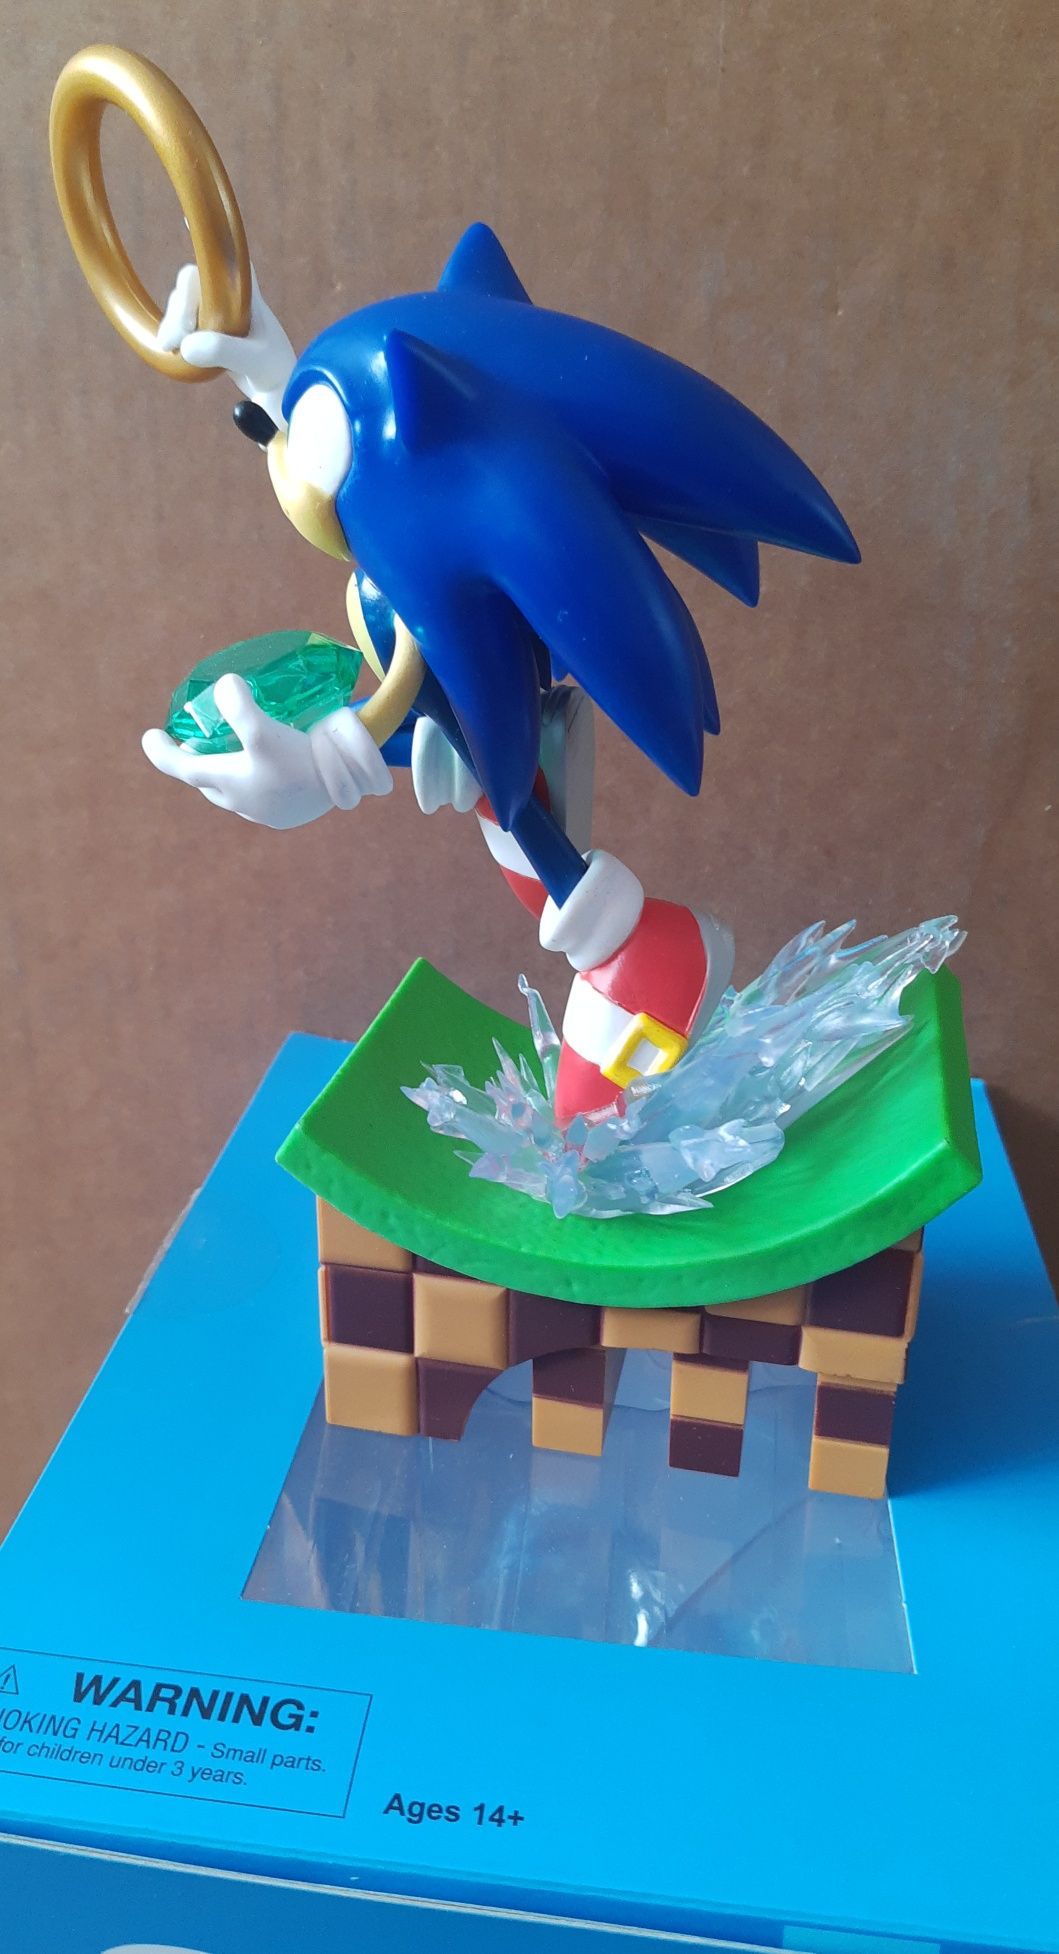 Sonic The Hedgehog figurka Diamond Select Gallery

PS4 Xbox One PC PS3